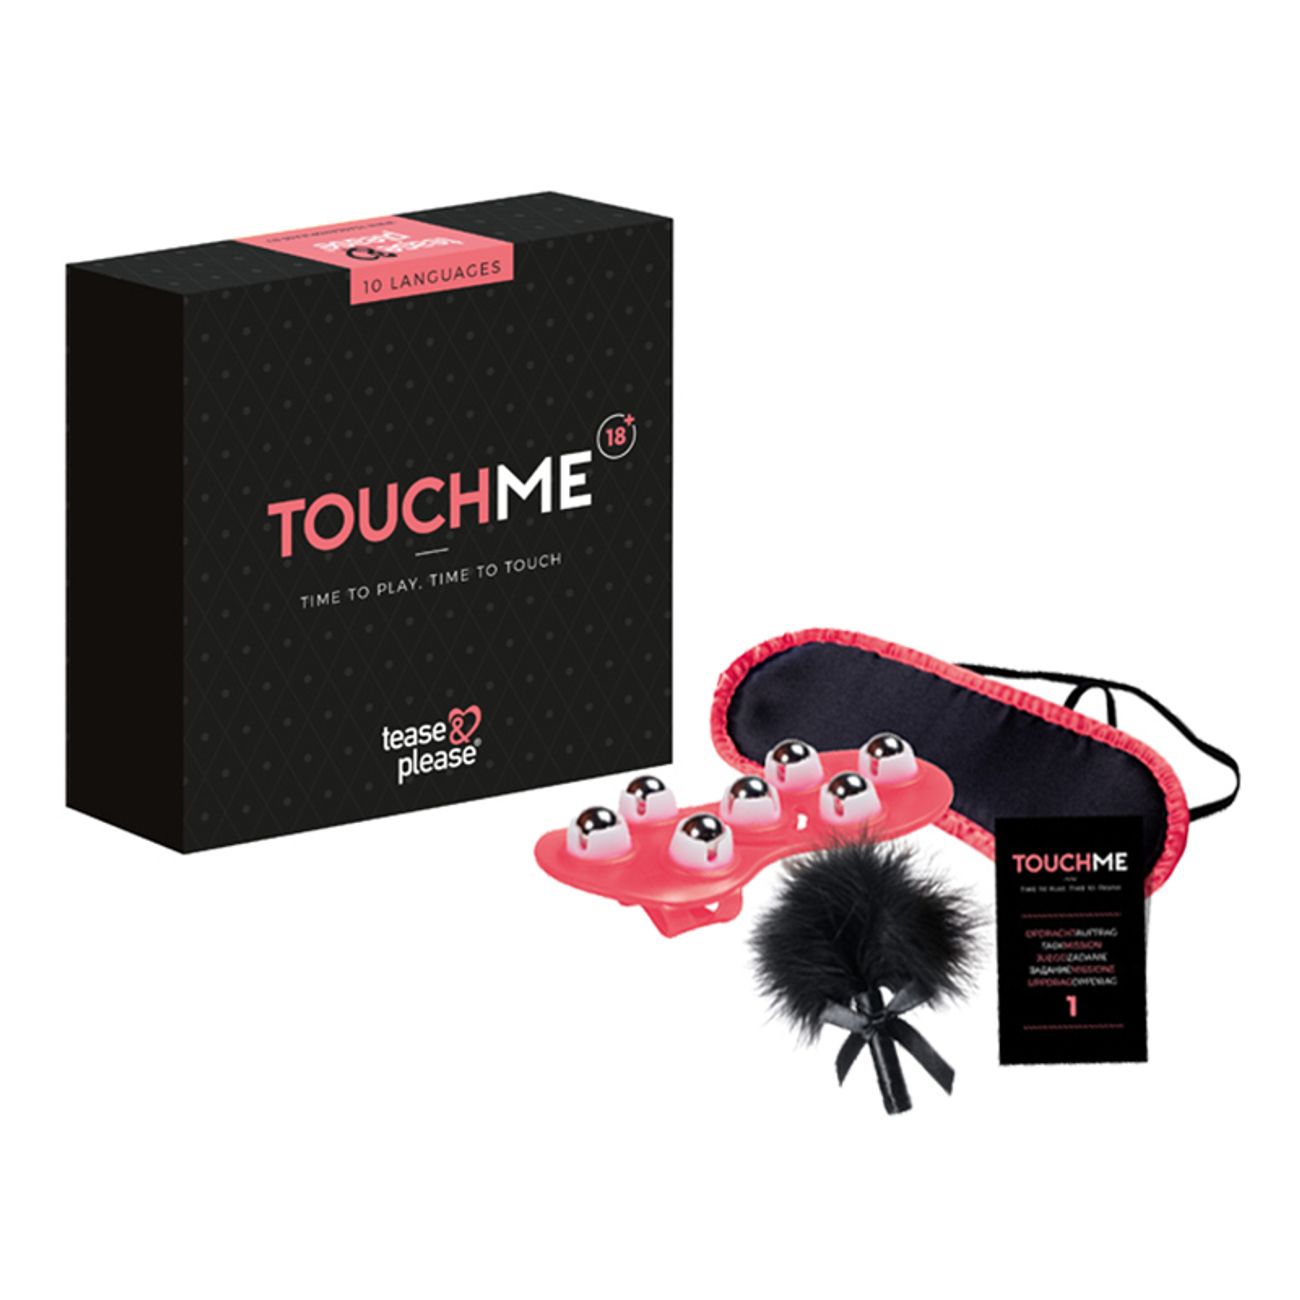 touch-me-spel-1